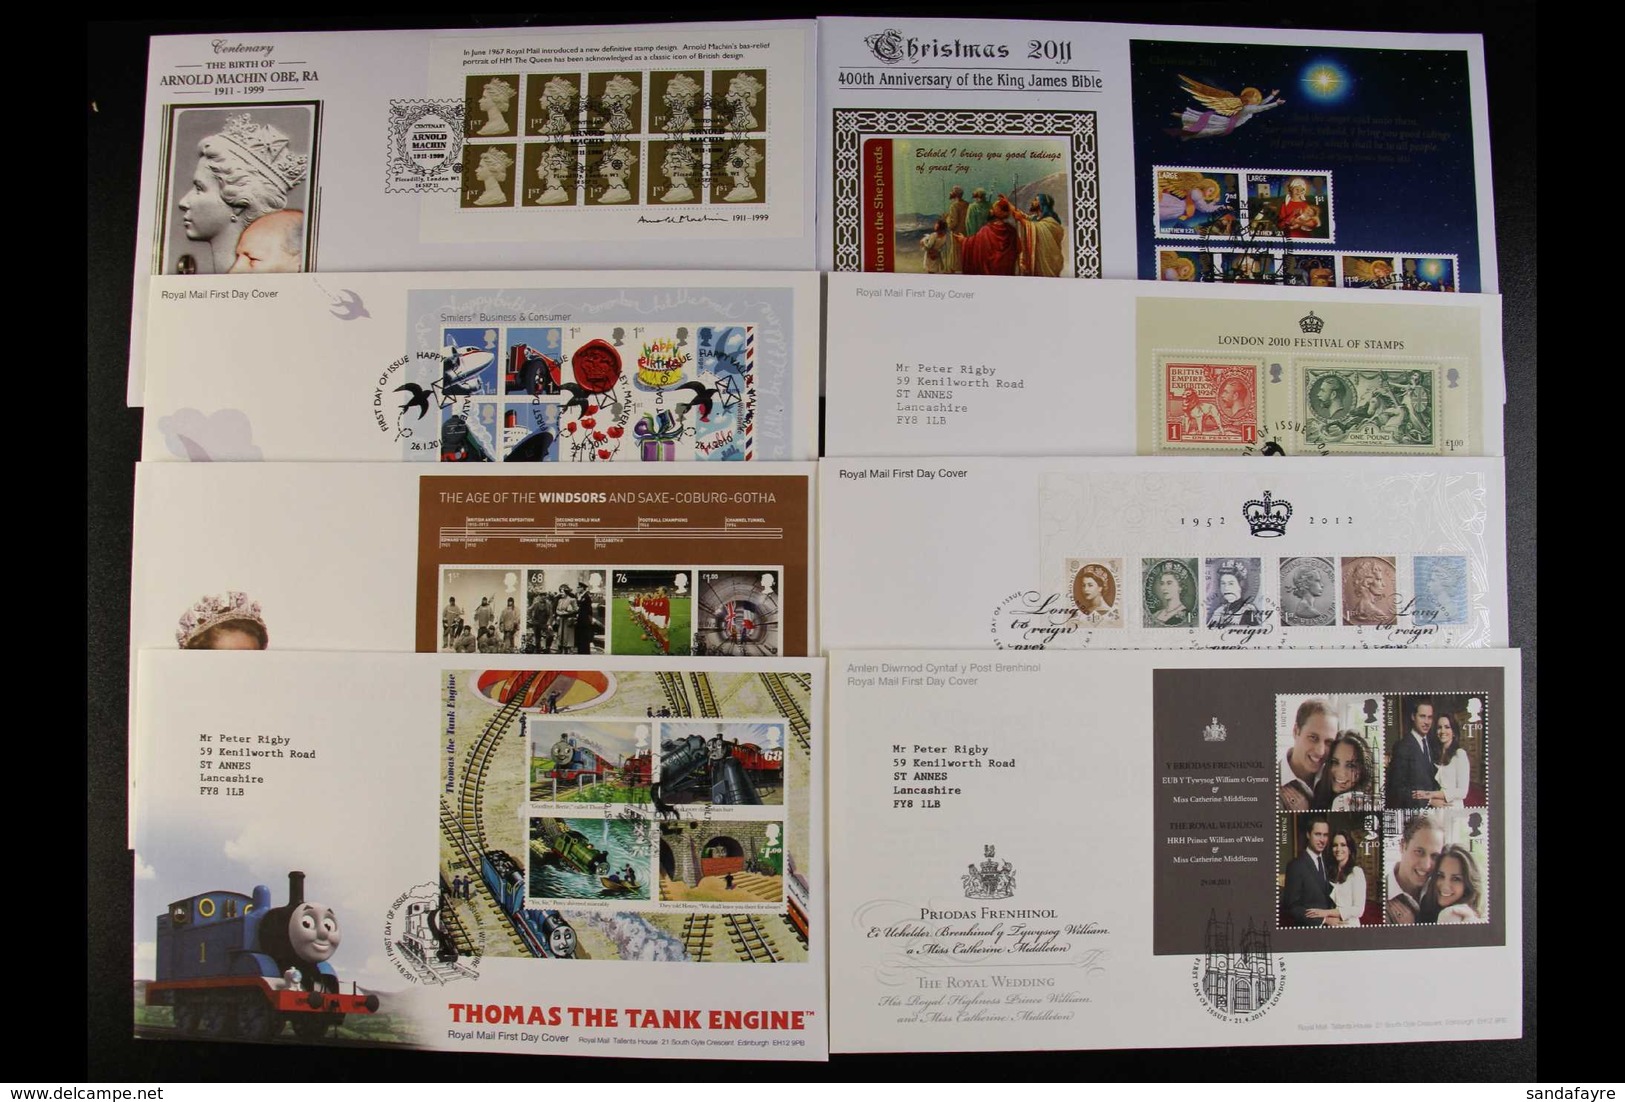 1978-2012 MINIATURE SHEET FDC COLLECTION. An Extensive Collection Of Miniature Sheet On Illustrated First Day Covers, Mo - FDC